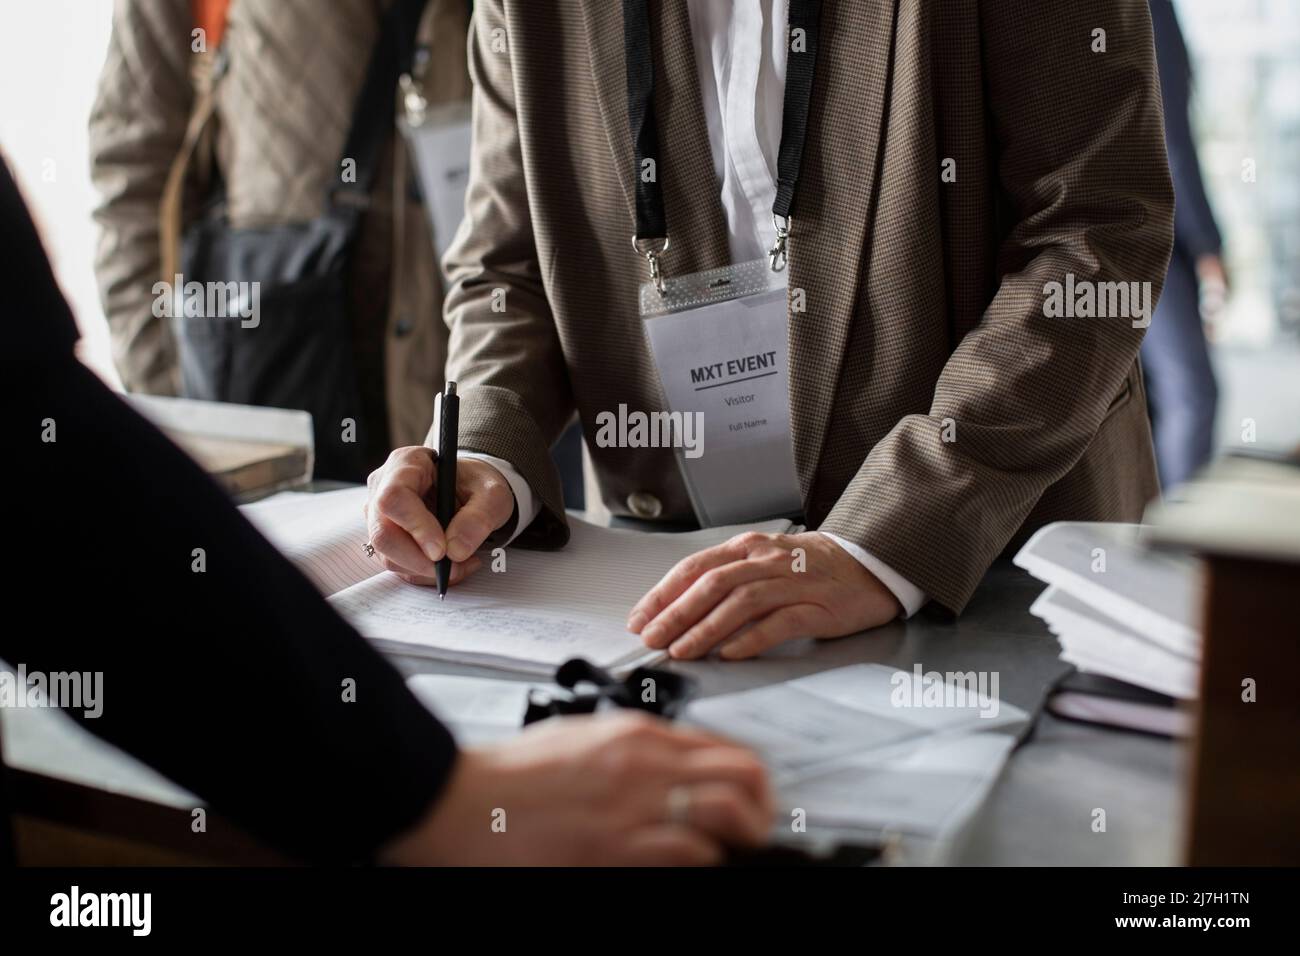 Midsection of businesswoman registering at counter during seminar Stock Photo